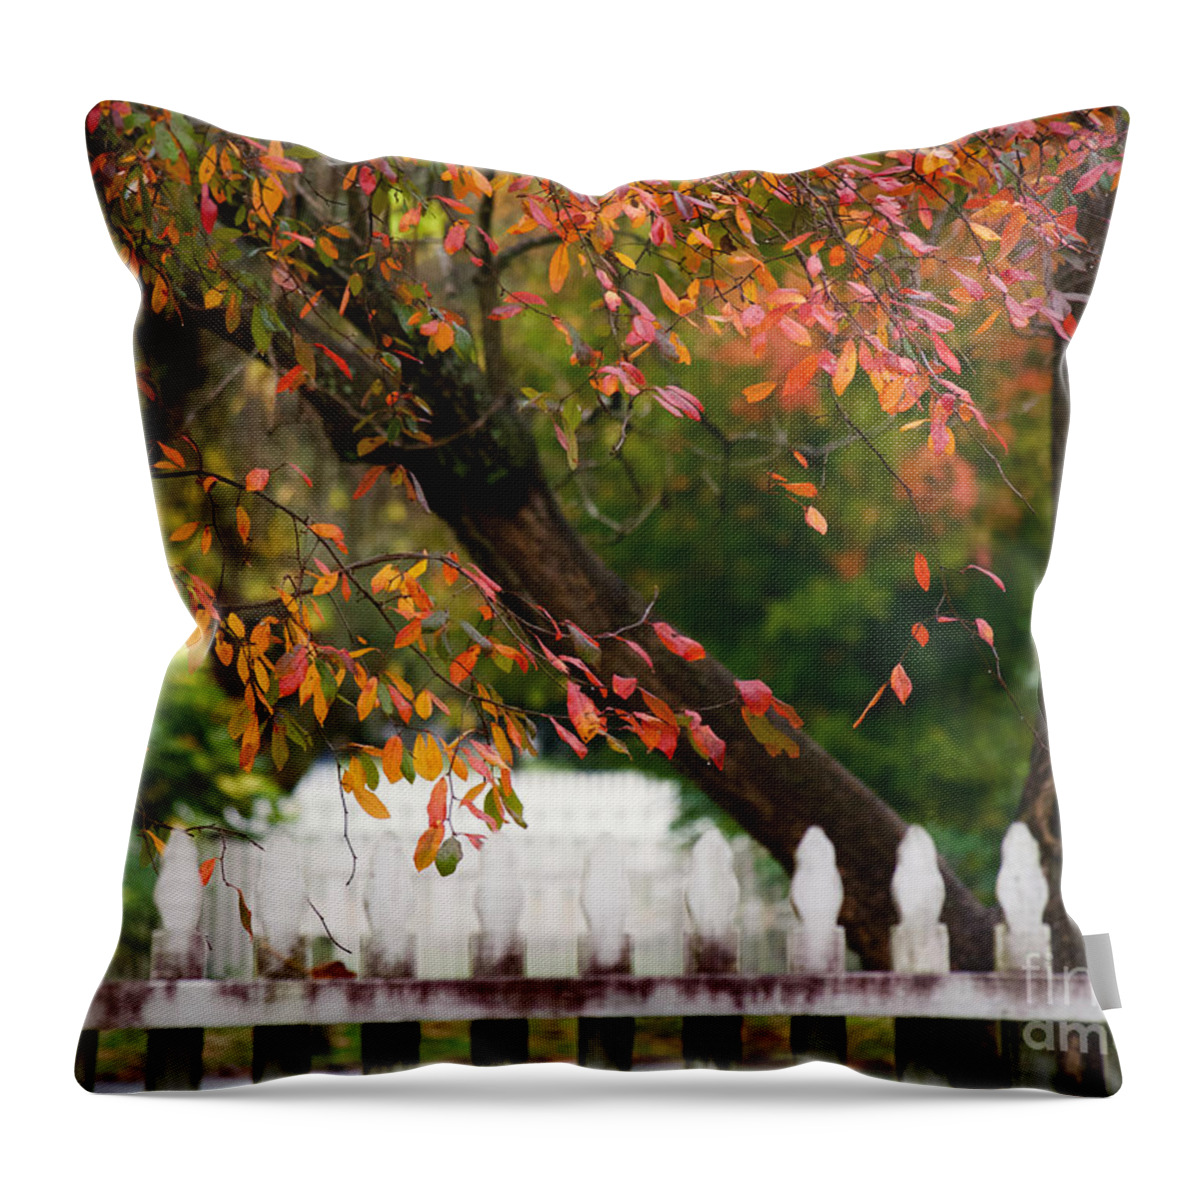 Colonial Williamsburg Throw Pillow featuring the photograph Colonial Fall Colors by Rachel Morrison